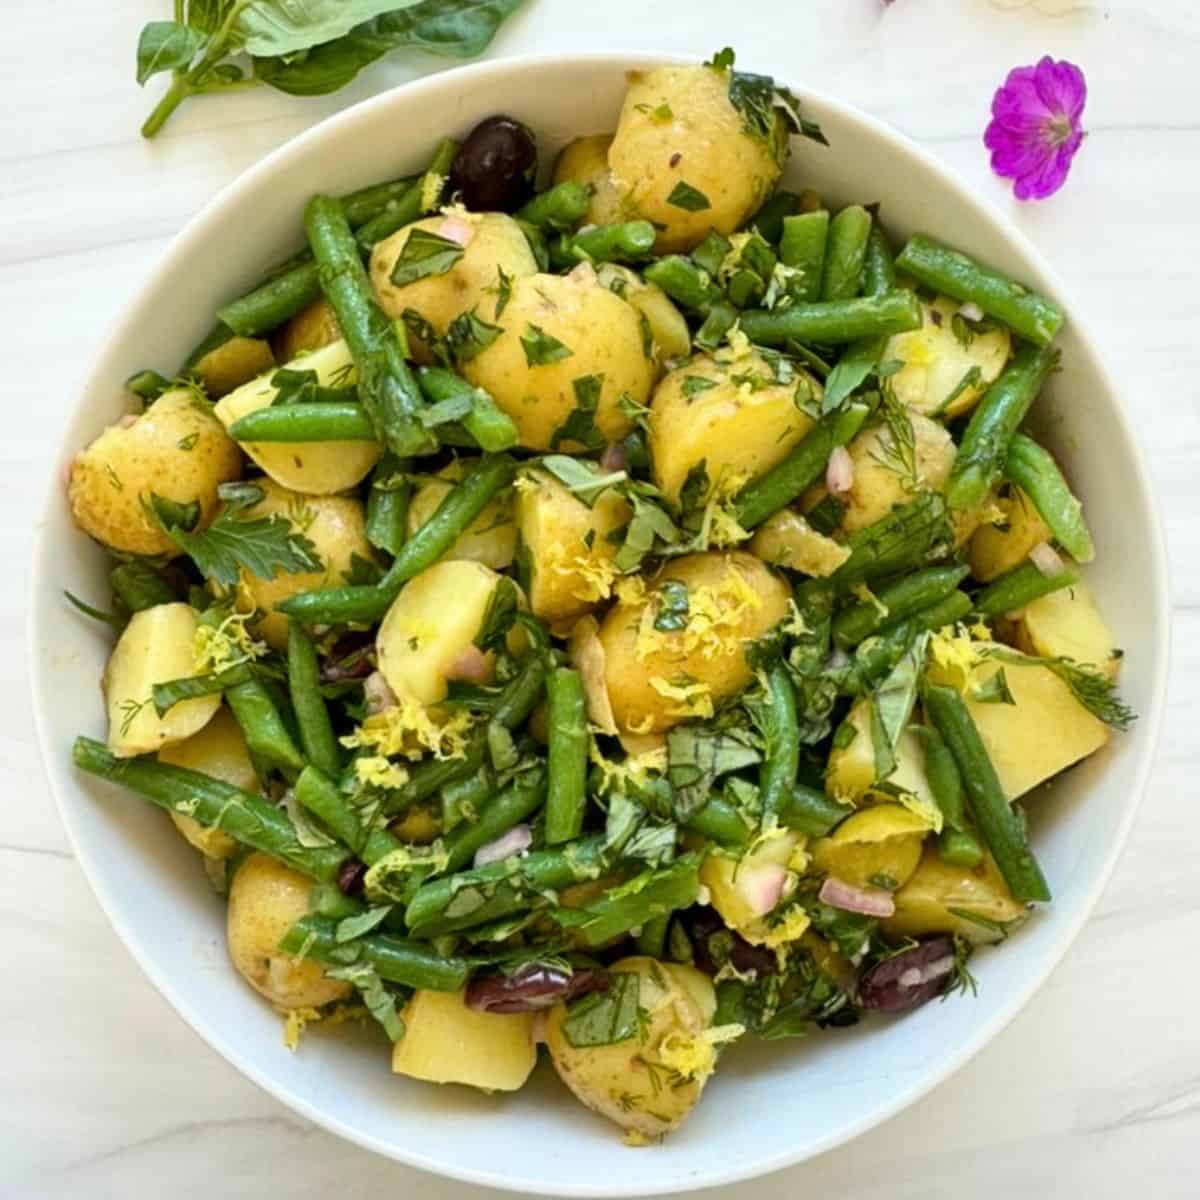 Gluten-Free Potato Salad Recipe With Green Beans And Herbs